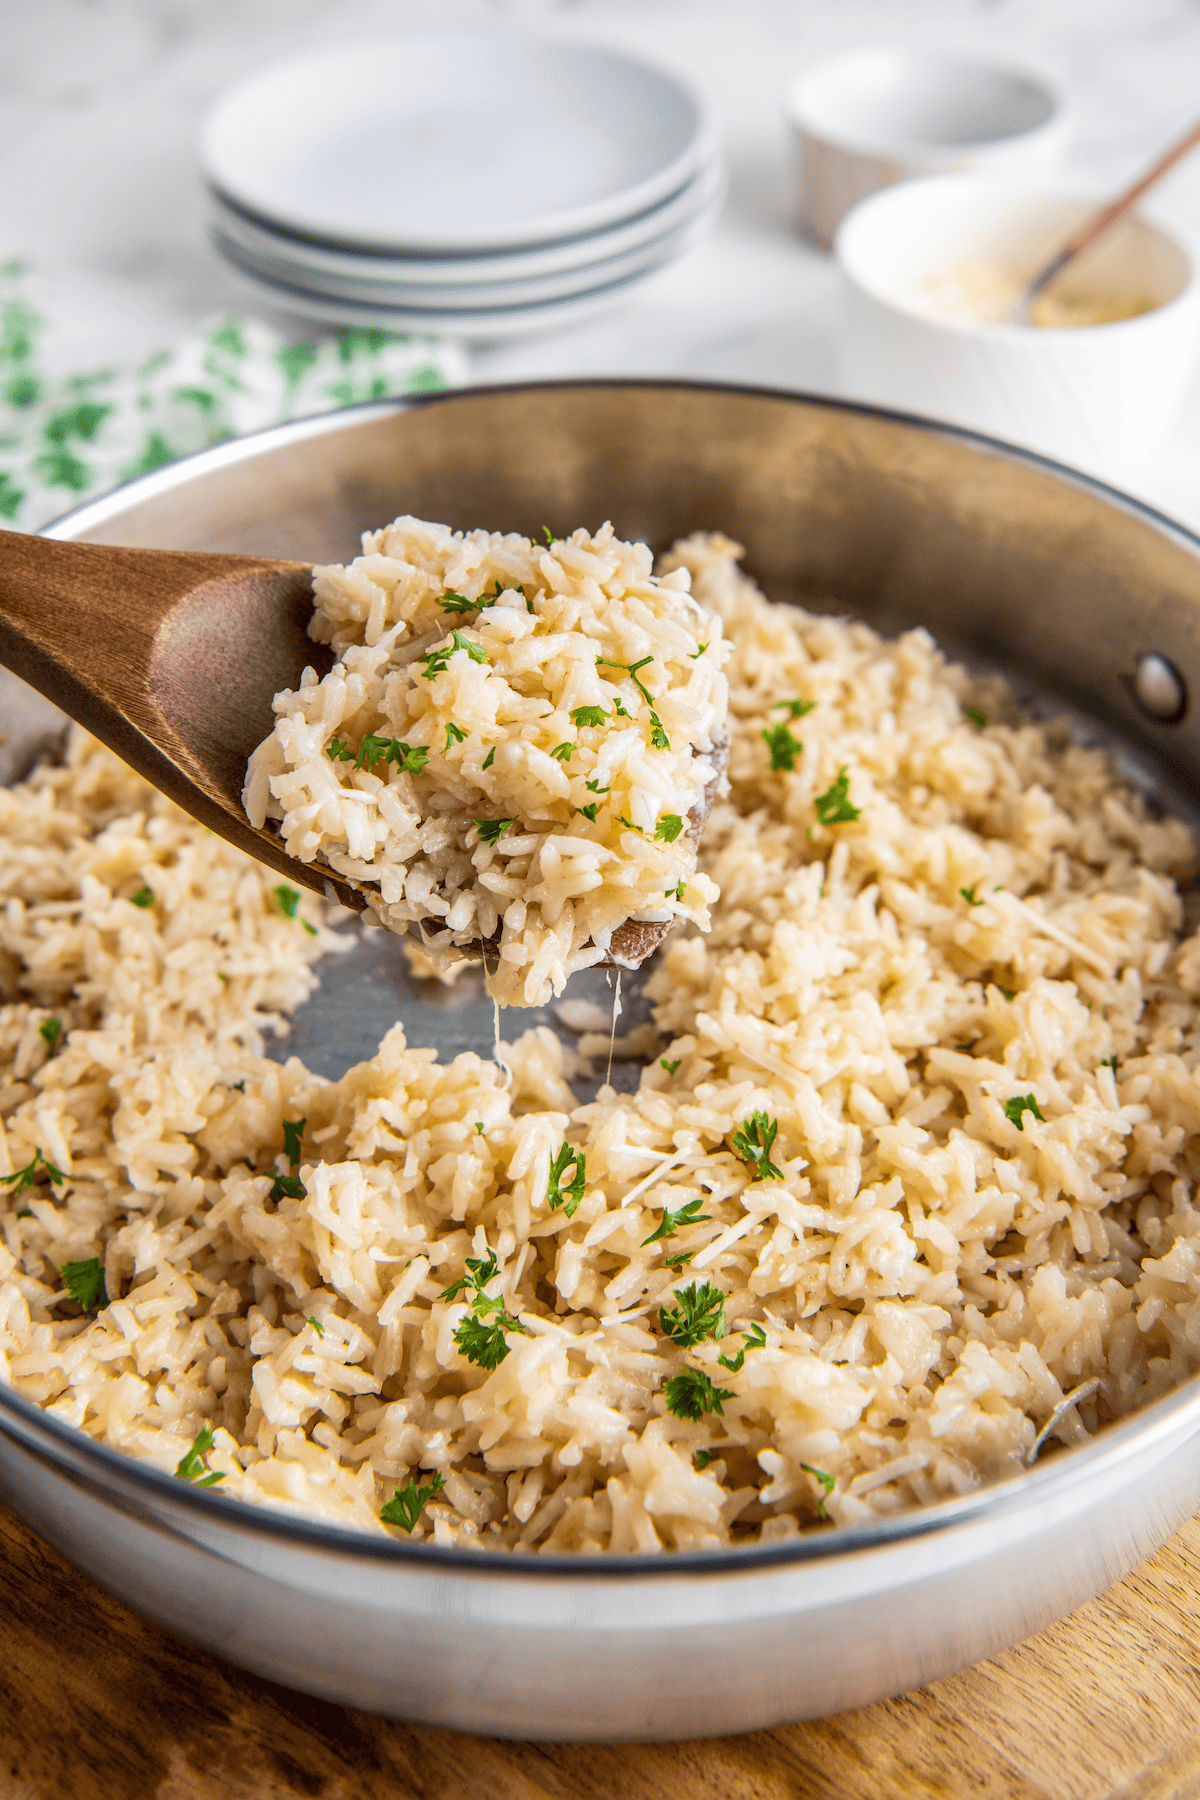 Parmesan rice with fresh parsley mixed in.